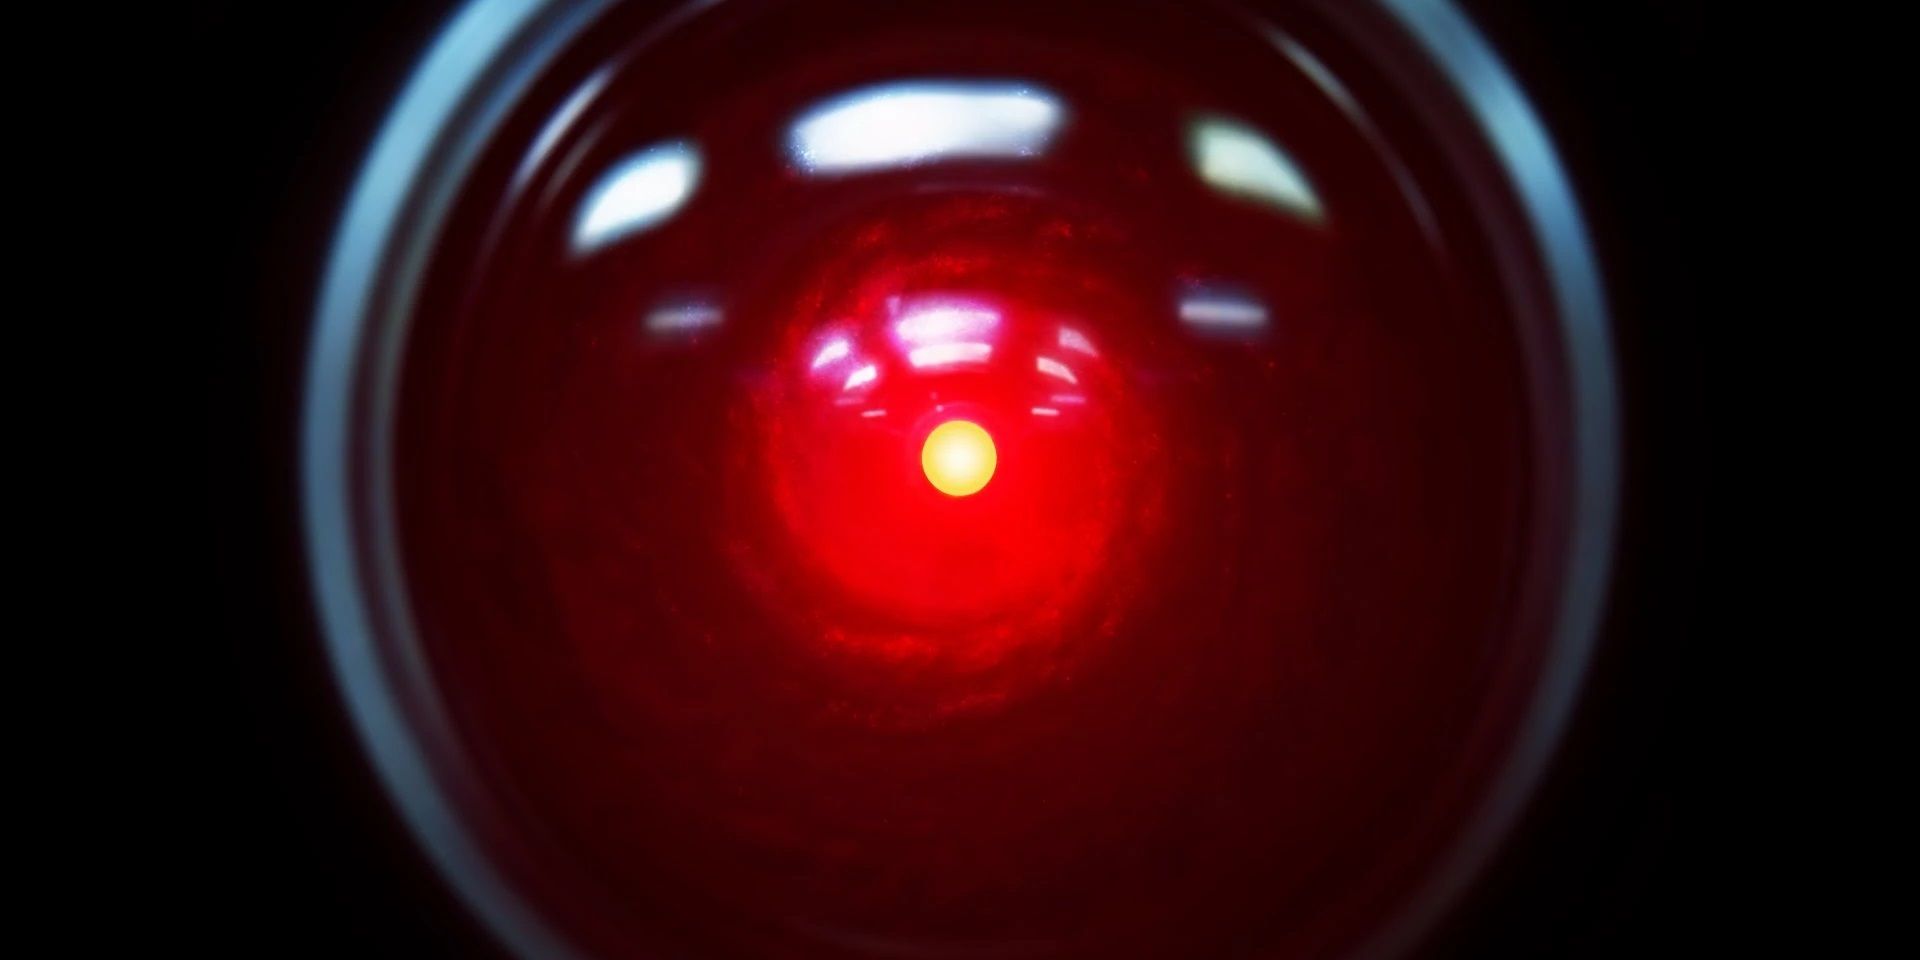 HAL 9000 in 2001 A Space Odyssey